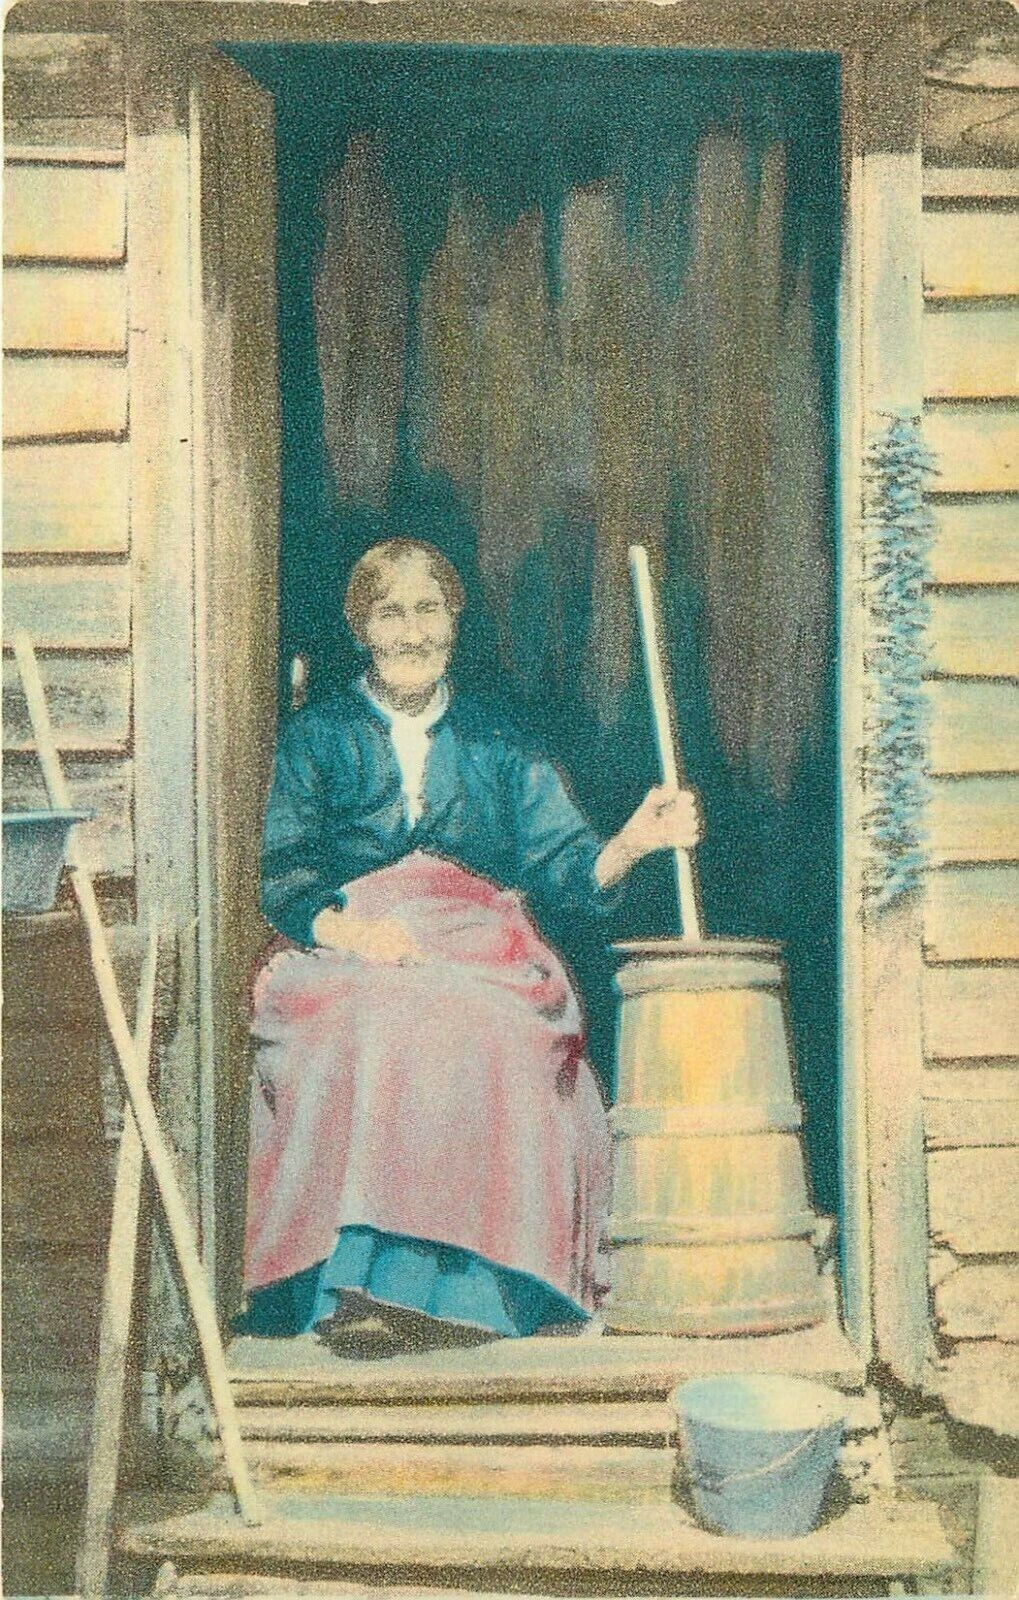 Mountain Woman at One of her Chores Churning Butter Postcard